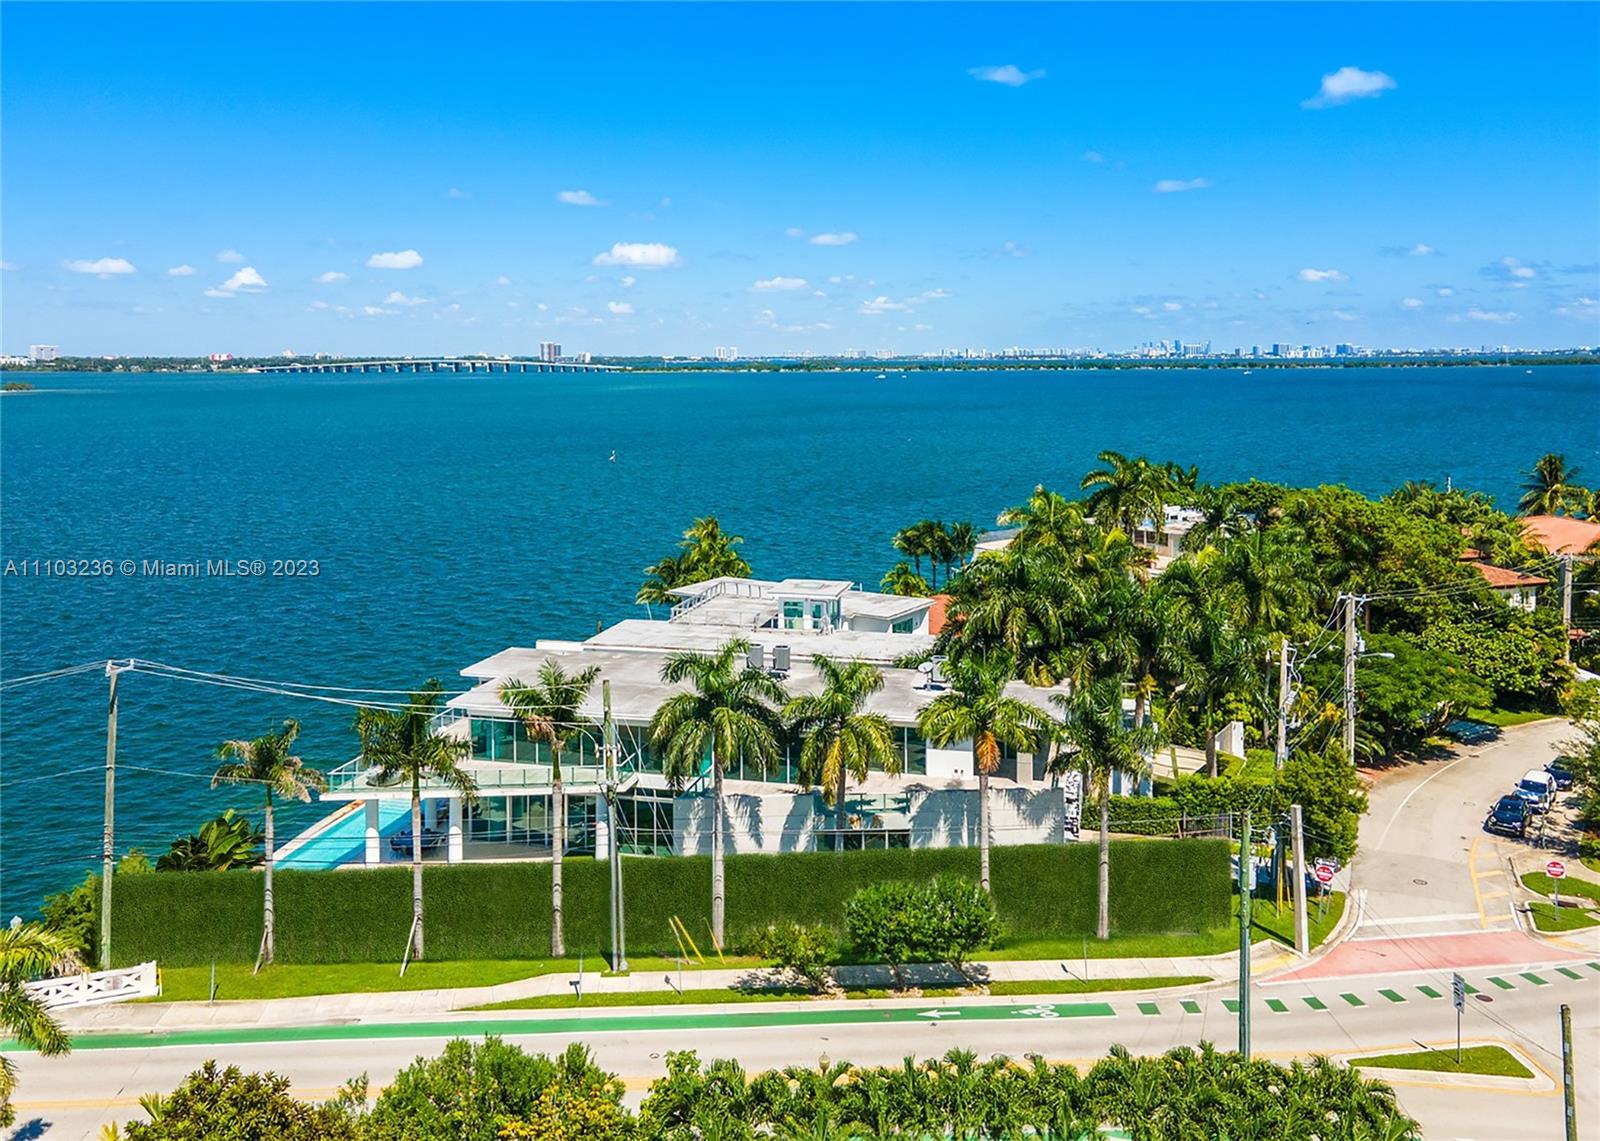 Tropical Modern 8,871 SF estate on the wonderful Venetian Islands will certainly impress upon arrival.  The sun drenched mansion boasts triple exposures from the tip of San Marco Island. Striking Downtown Miami Skyline views and sunsets to the west, cruise ships alley to the south and Edgewater skyline to the north.  An impressive spiral staircase, reminiscent of the Guggenheim Museum, graces the home as a sculptural work of art.  Beautiful Scandinavian interior design features wide plank wood floors, Baltic Grey Marble and Carrara Marble diamond patterns adorn the wonderful social rooms, and an enormous open concept kitchen all with water views.The grand suite features a flow-through fireplace, gym, full spa with  steam/sauna, waterfall jacuzzi and meditation room. Live the ultimate life.